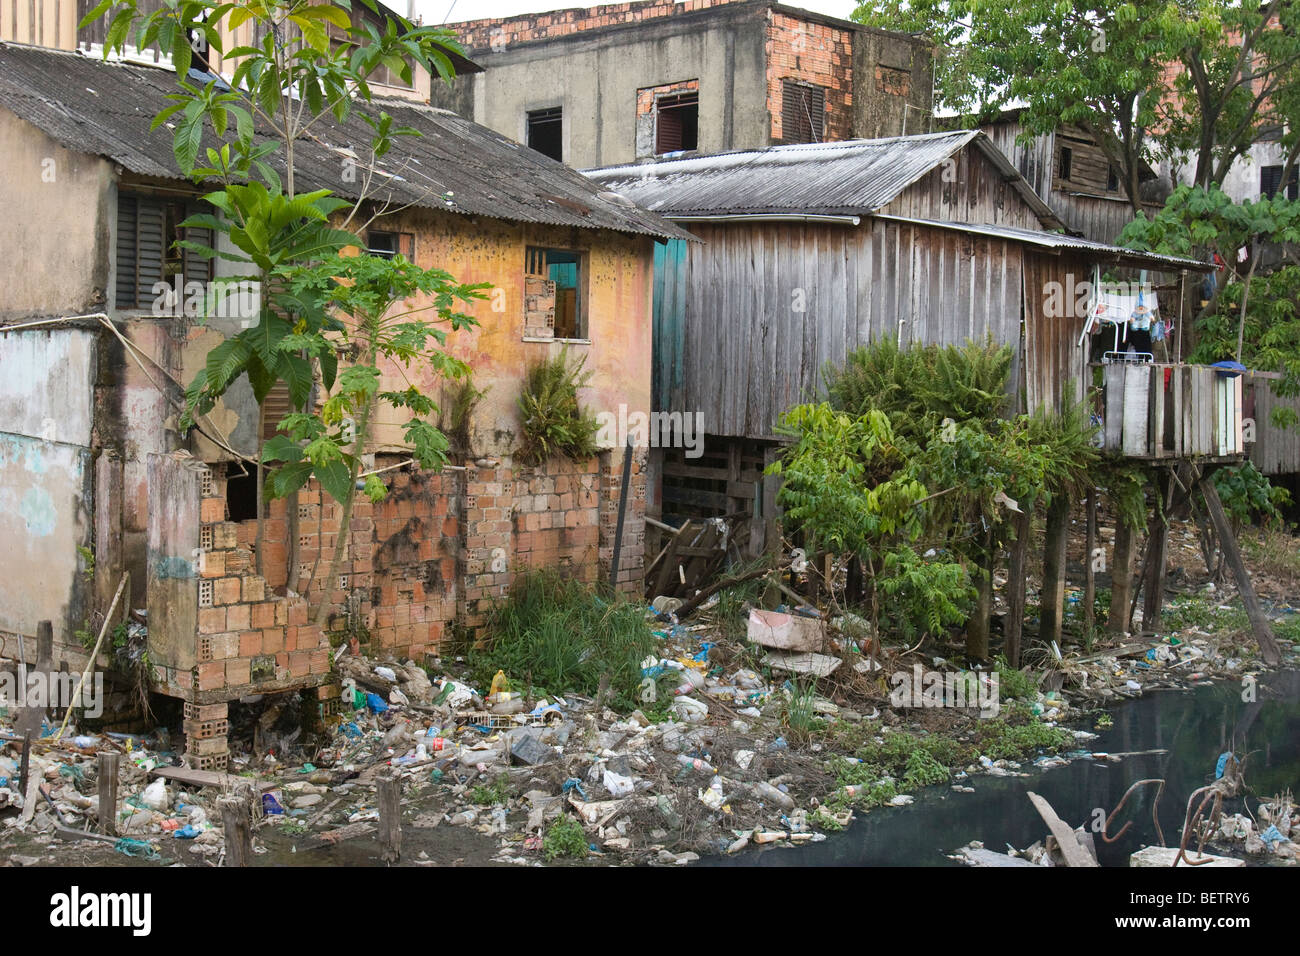 a small polluted creek flows by a rrun down shanty town in a third world barrio in the Amazon city of Manaus in Brazil Stock Photo